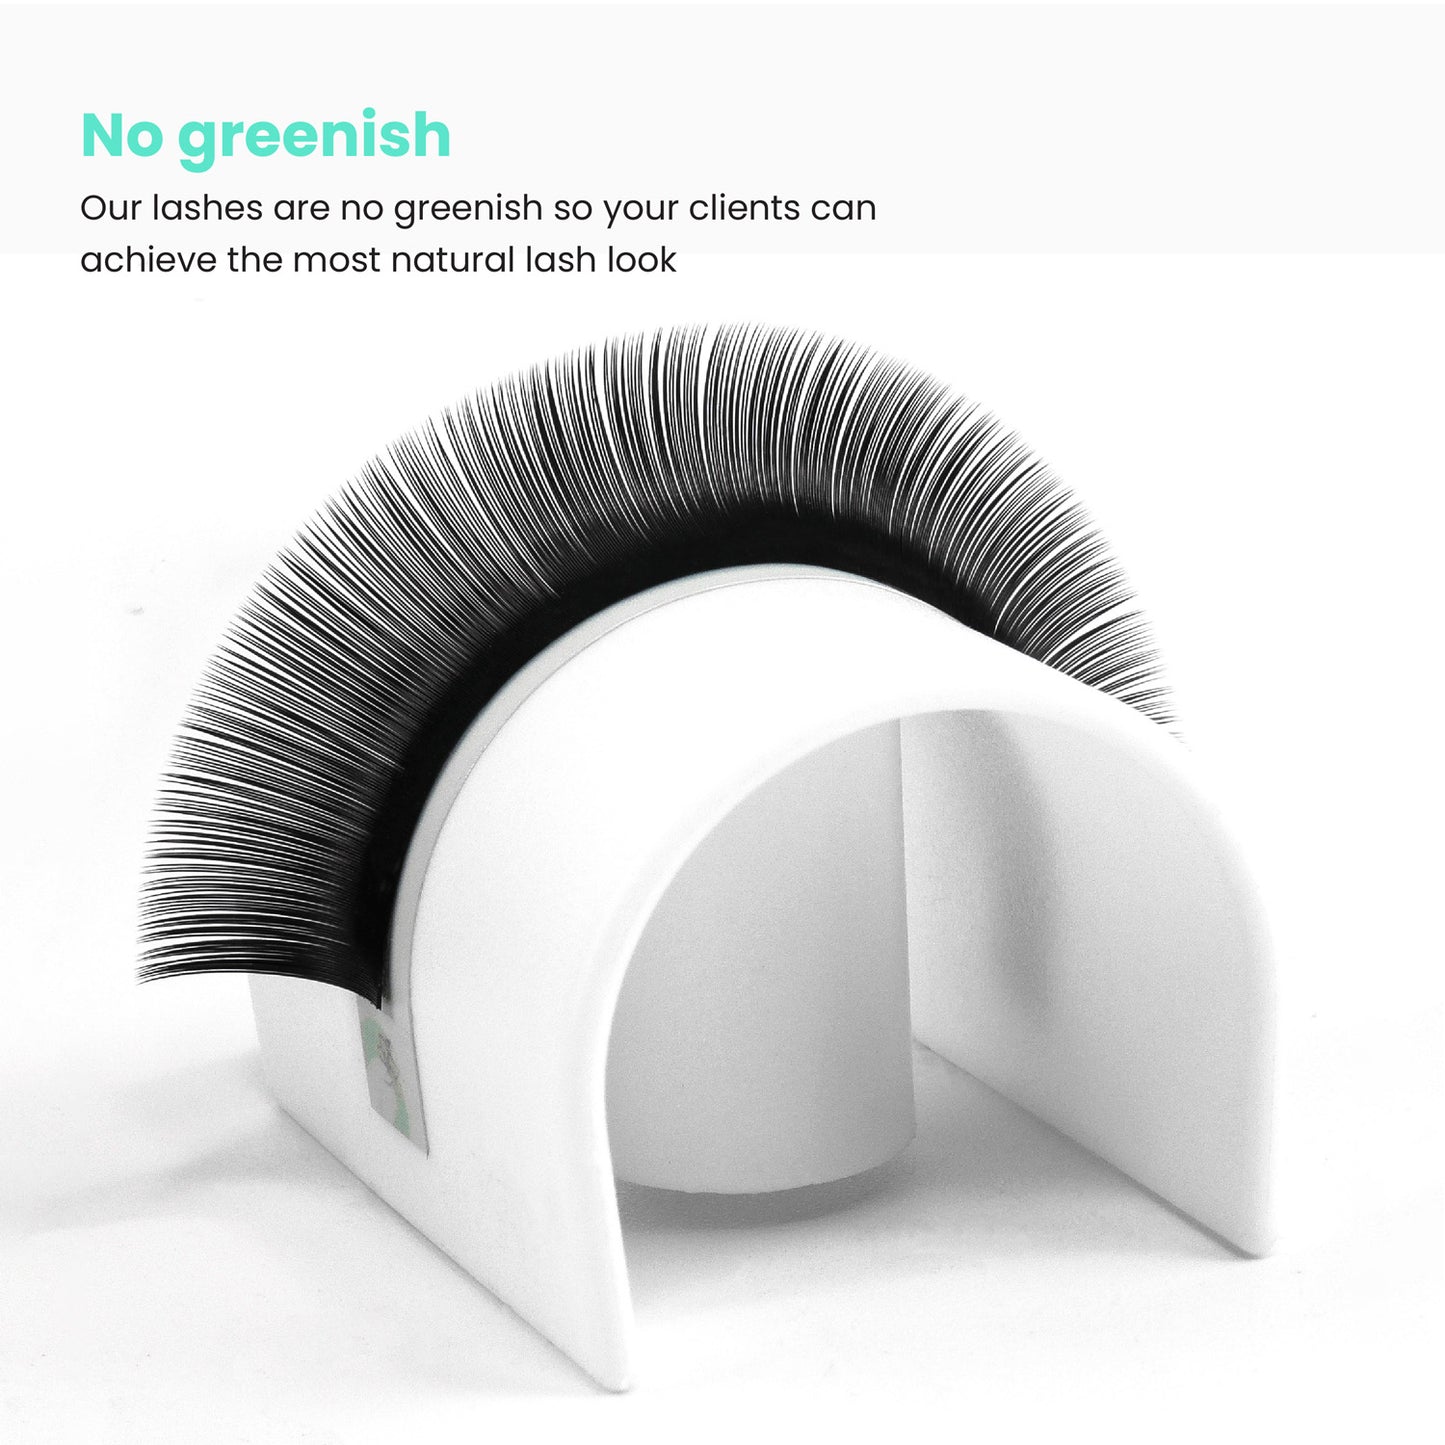 Super Mink classic lash strip placed on a glue ring, showcasing beautifully dense and even lengths within the lash strip.